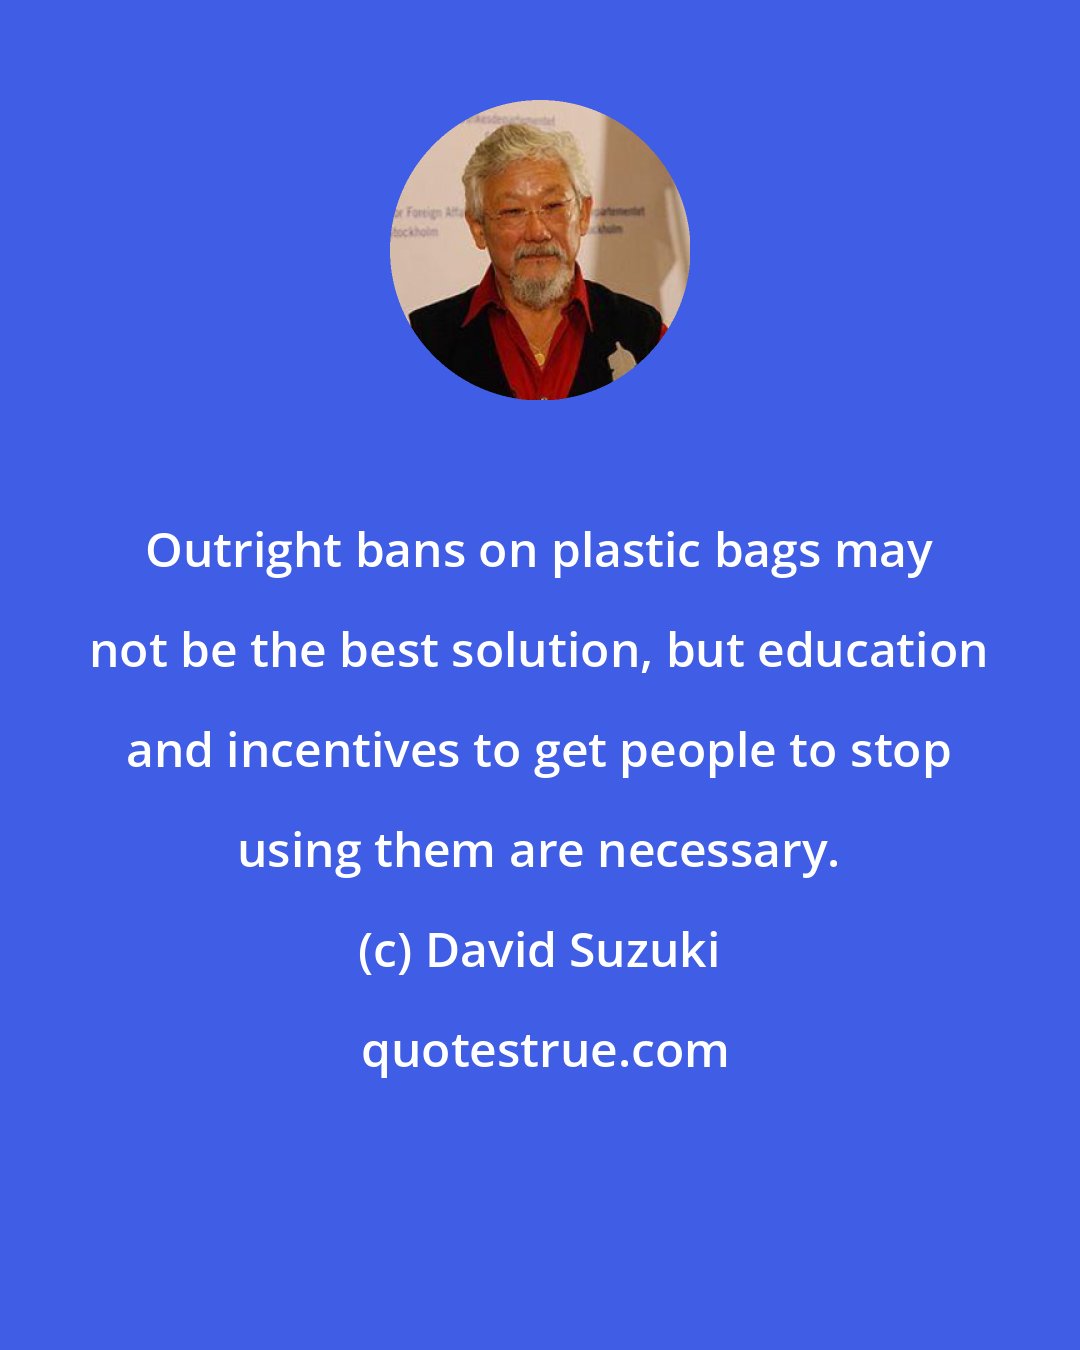 David Suzuki: Outright bans on plastic bags may not be the best solution, but education and incentives to get people to stop using them are necessary.